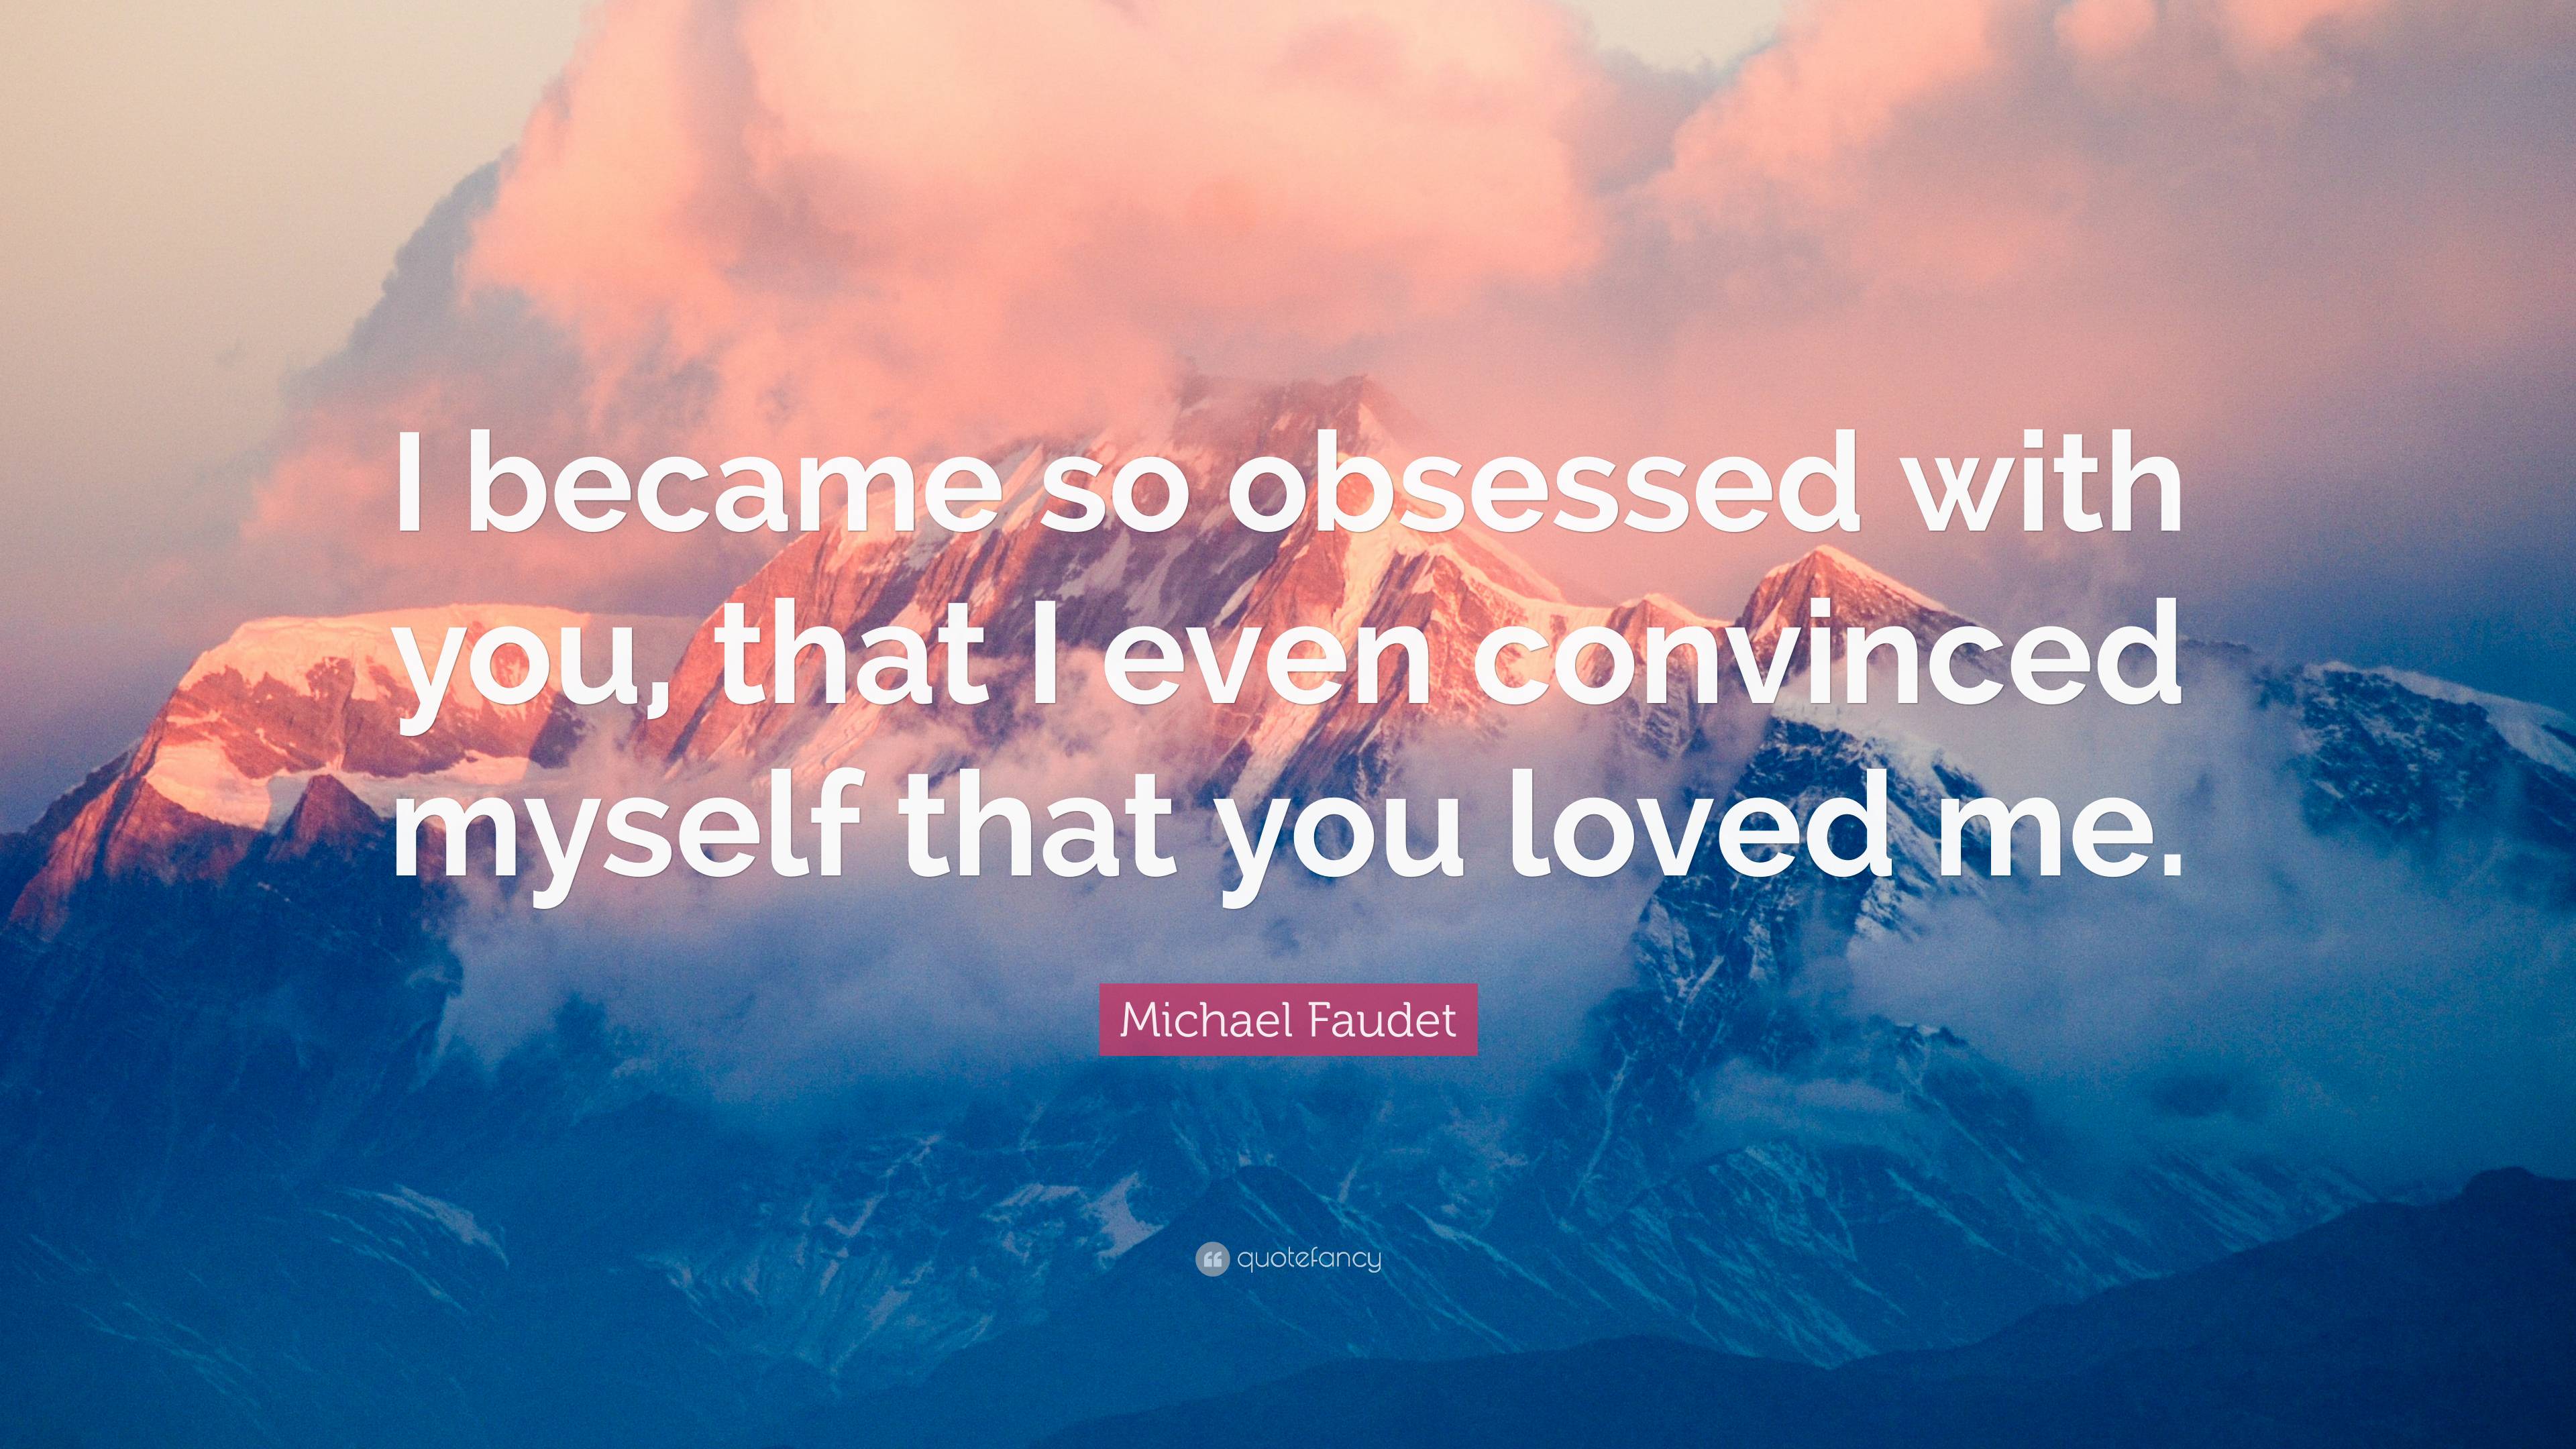 https://quotefancy.com/media/wallpaper/3840x2160/7276748-Michael-Faudet-Quote-I-became-so-obsessed-with-you-that-I-even.jpg